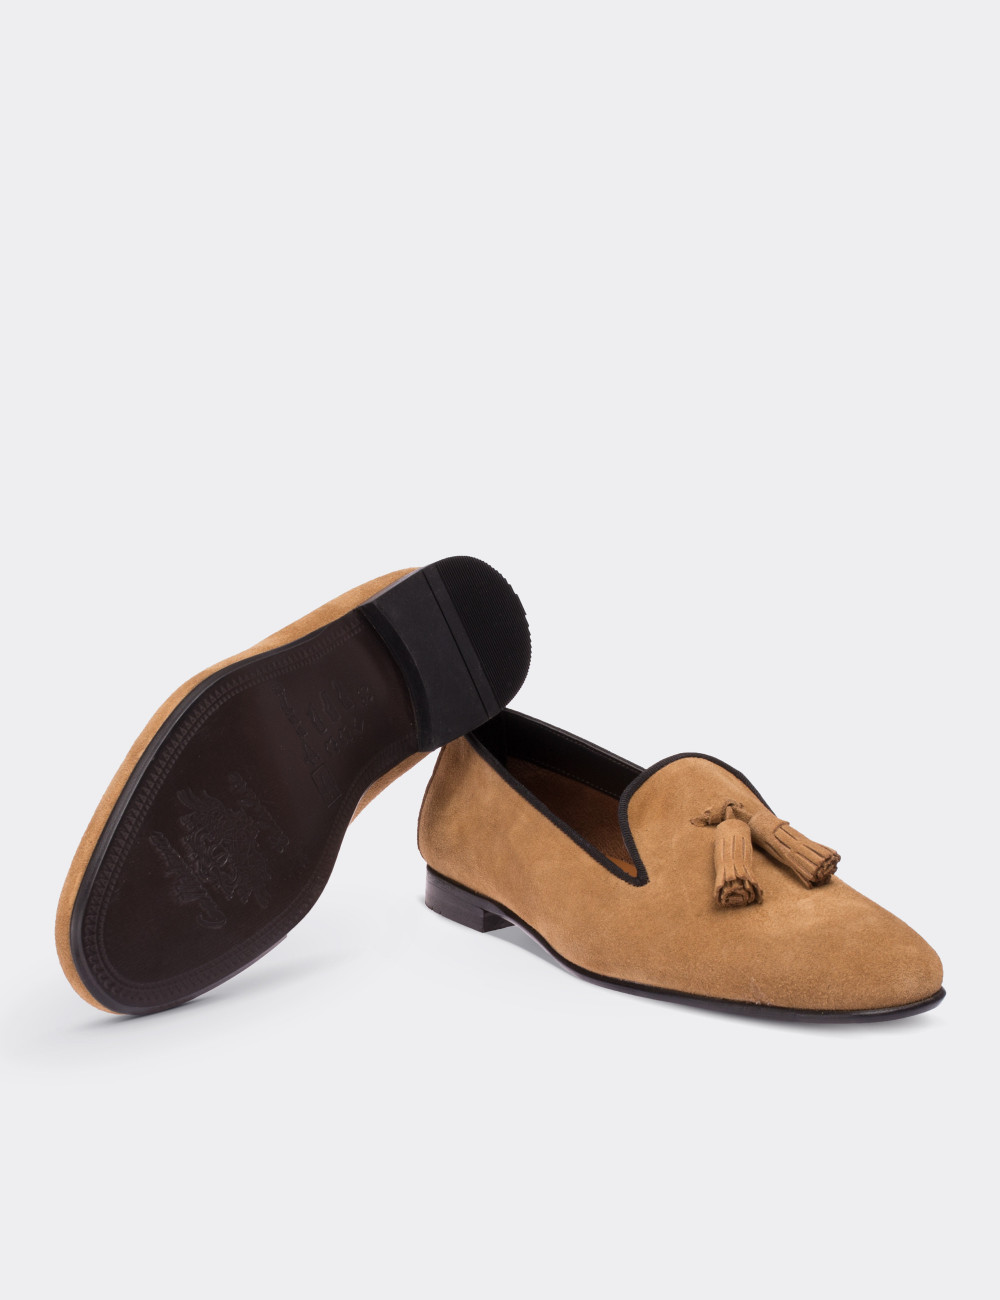 Tan Suede Leather Loafers - 01613ZTBAM01